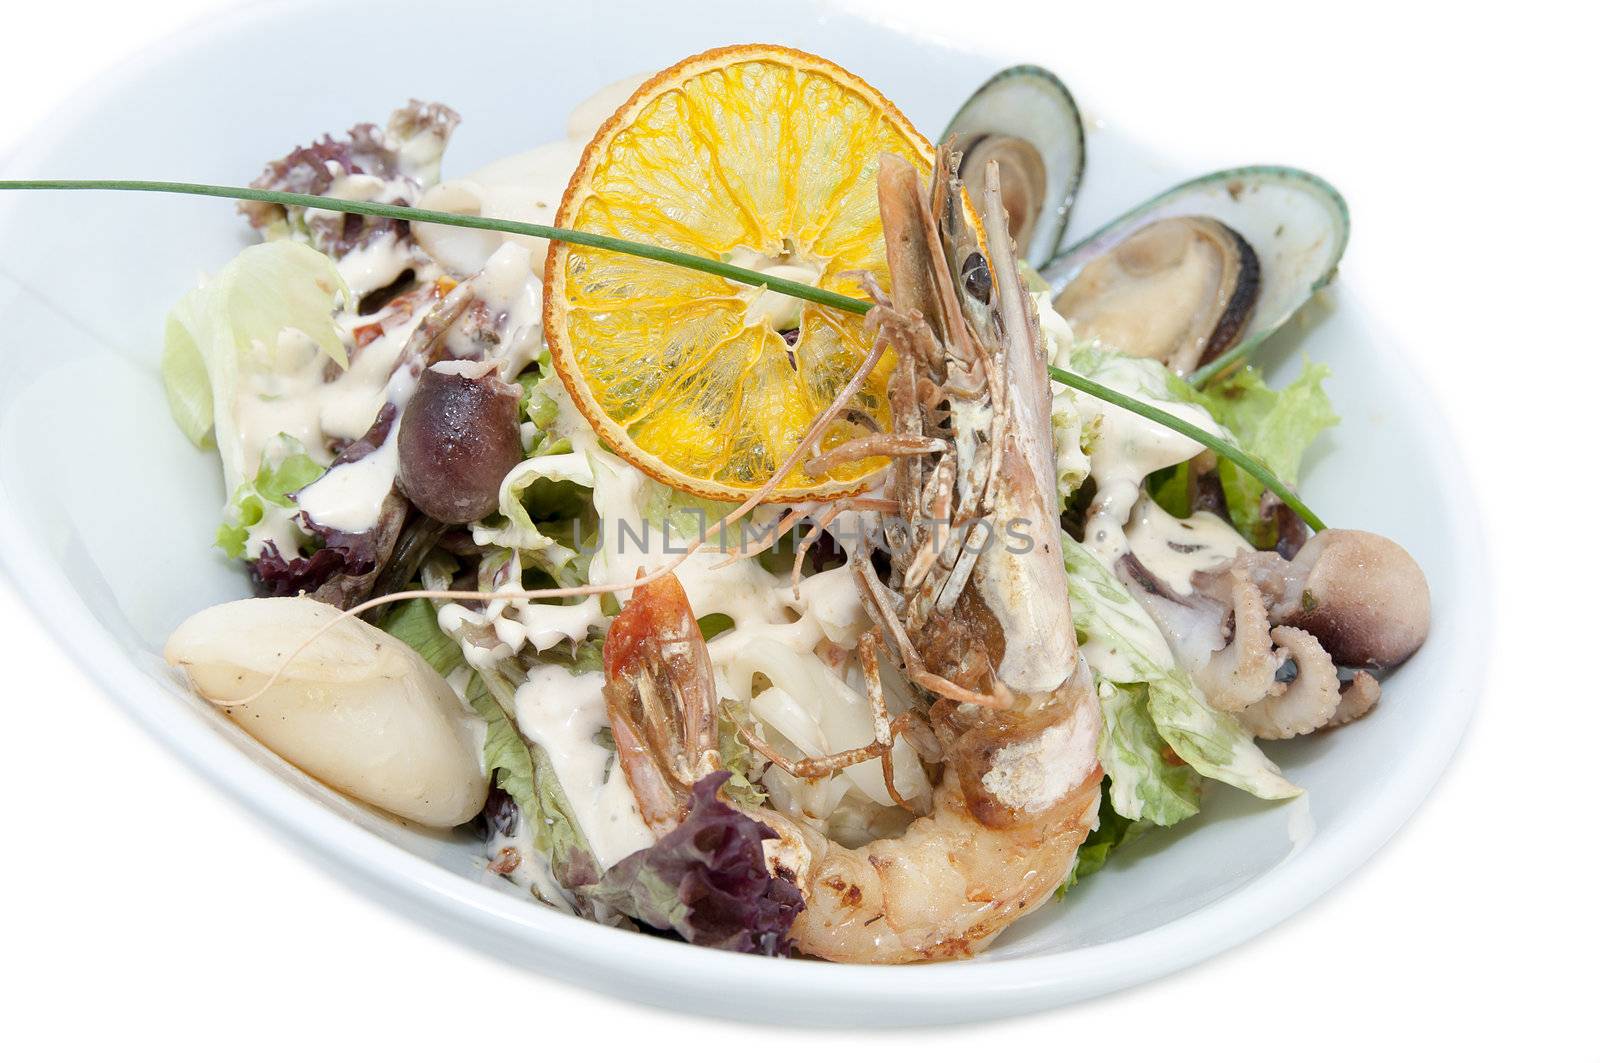 salad with seafood in a restaurant on a white background